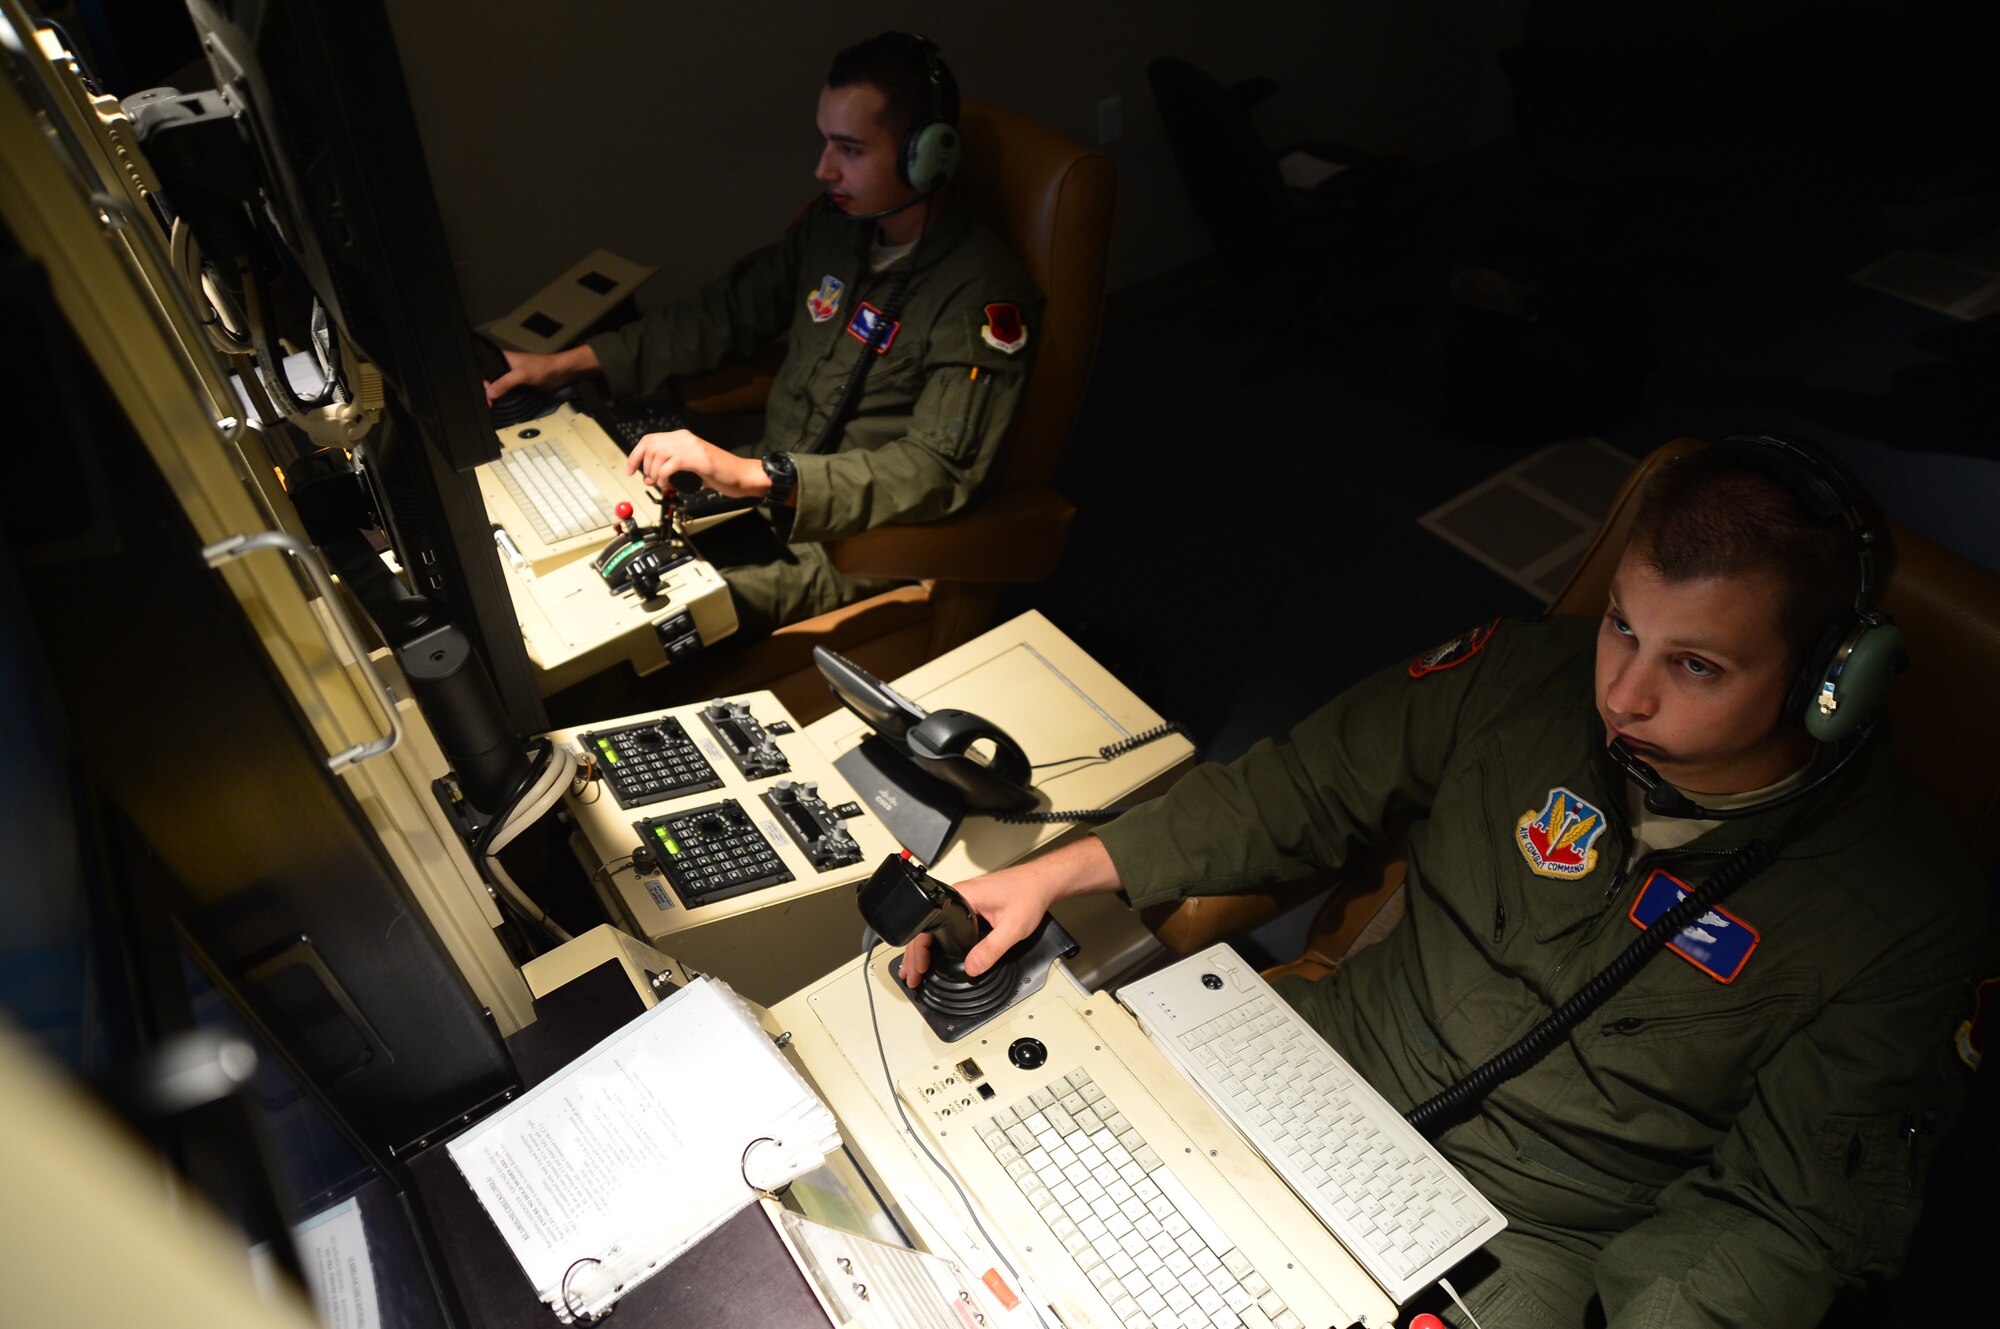 Capt. Ben, (right) 432nd Wing/432nd Air Expeditionary Wing Remotely Piloted Aircraft pilot, and Senior Airman Travis, 432nd Wing/432nd AEW RPA sensor operator, fly an MQ-1 Predator during the wing’s 2 million flying hour milestone Oct. 22, 2013. The wing flew its first 1 million hours in April 2011. The wing’s 2 million hour mark was achieved 32 months later, culminating in more than 215,000 total missions completed and nearly 94 percent of all missions flown in support of major combat operations due in large part to total force integration efforts and an expansion of combat air patrols. (U.S. Air Force photo by Staff Sgt. N.B./released)